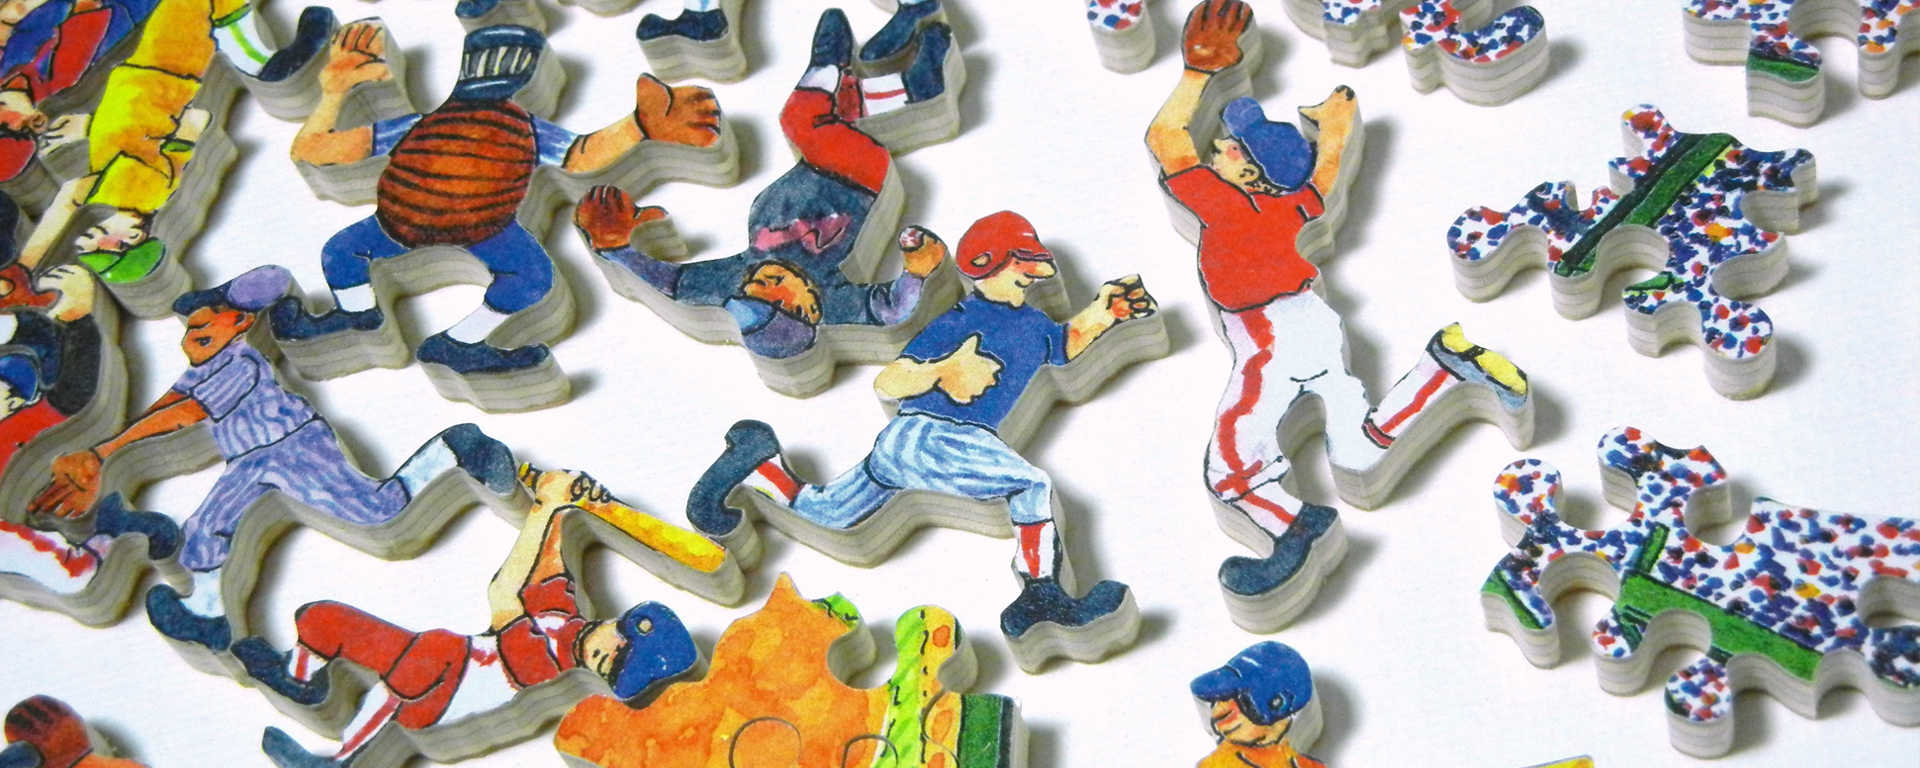 Wooden baseball puzzle in progress with whimsy shaped pieces shaped like baseball players.